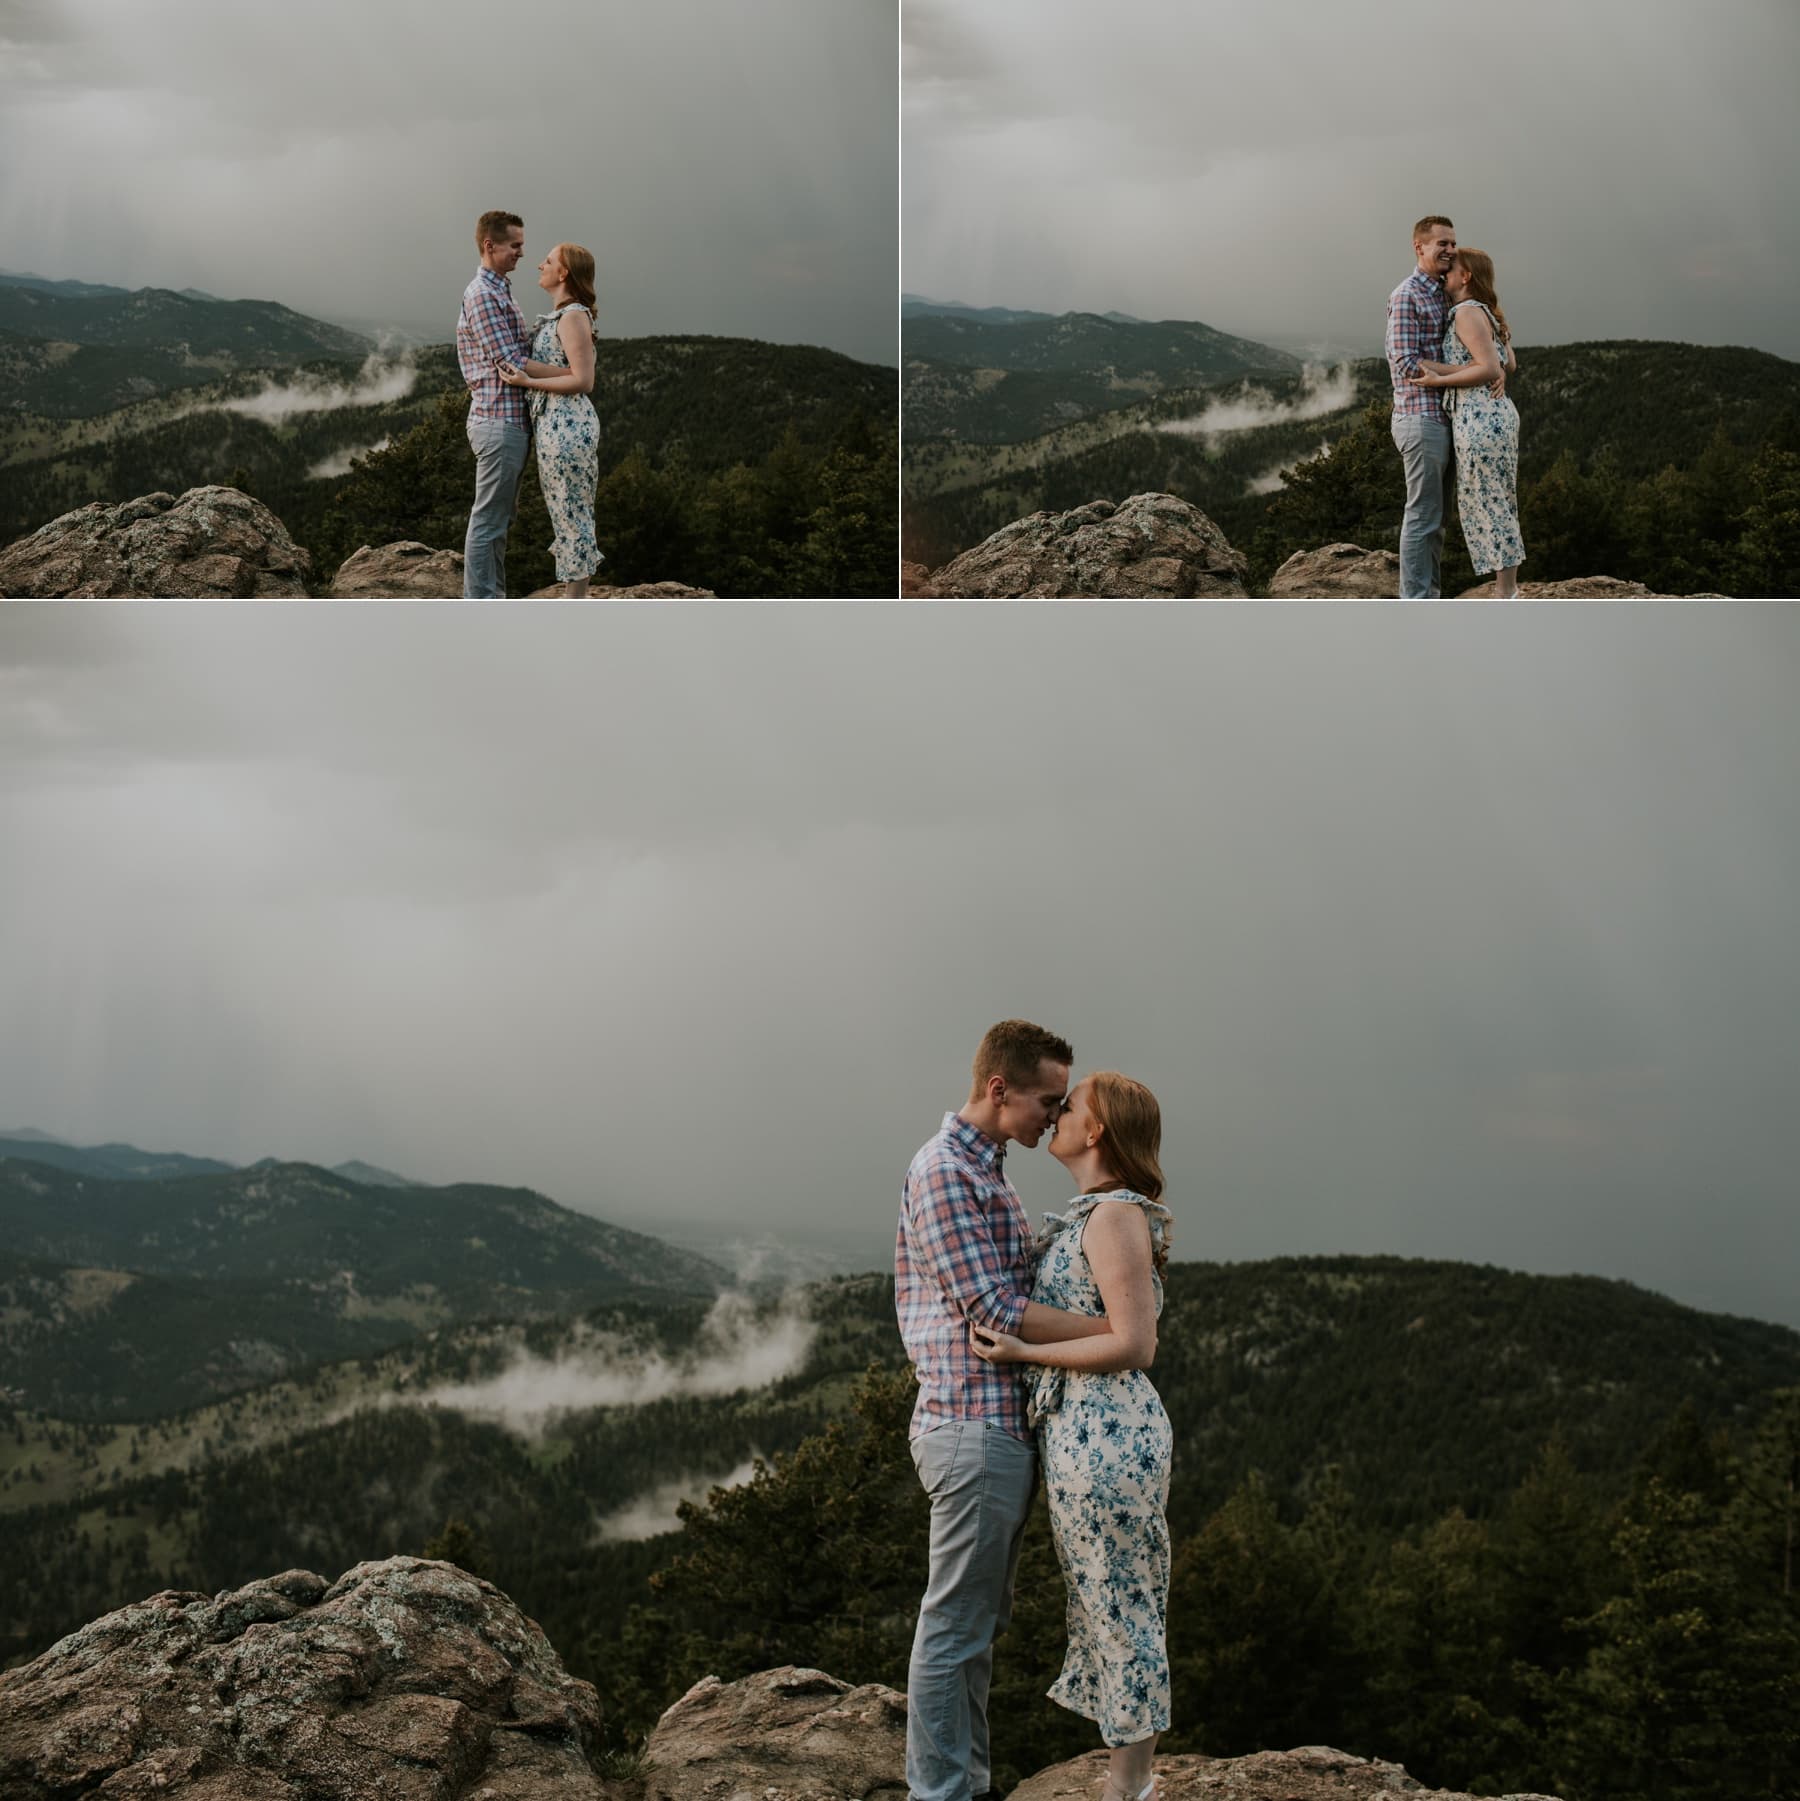 lost gulch overlook engagement, lost gulch overlook, engagement session after the storm, stormy engagement session, boulder engagment session, hail storm, boulder engagement session